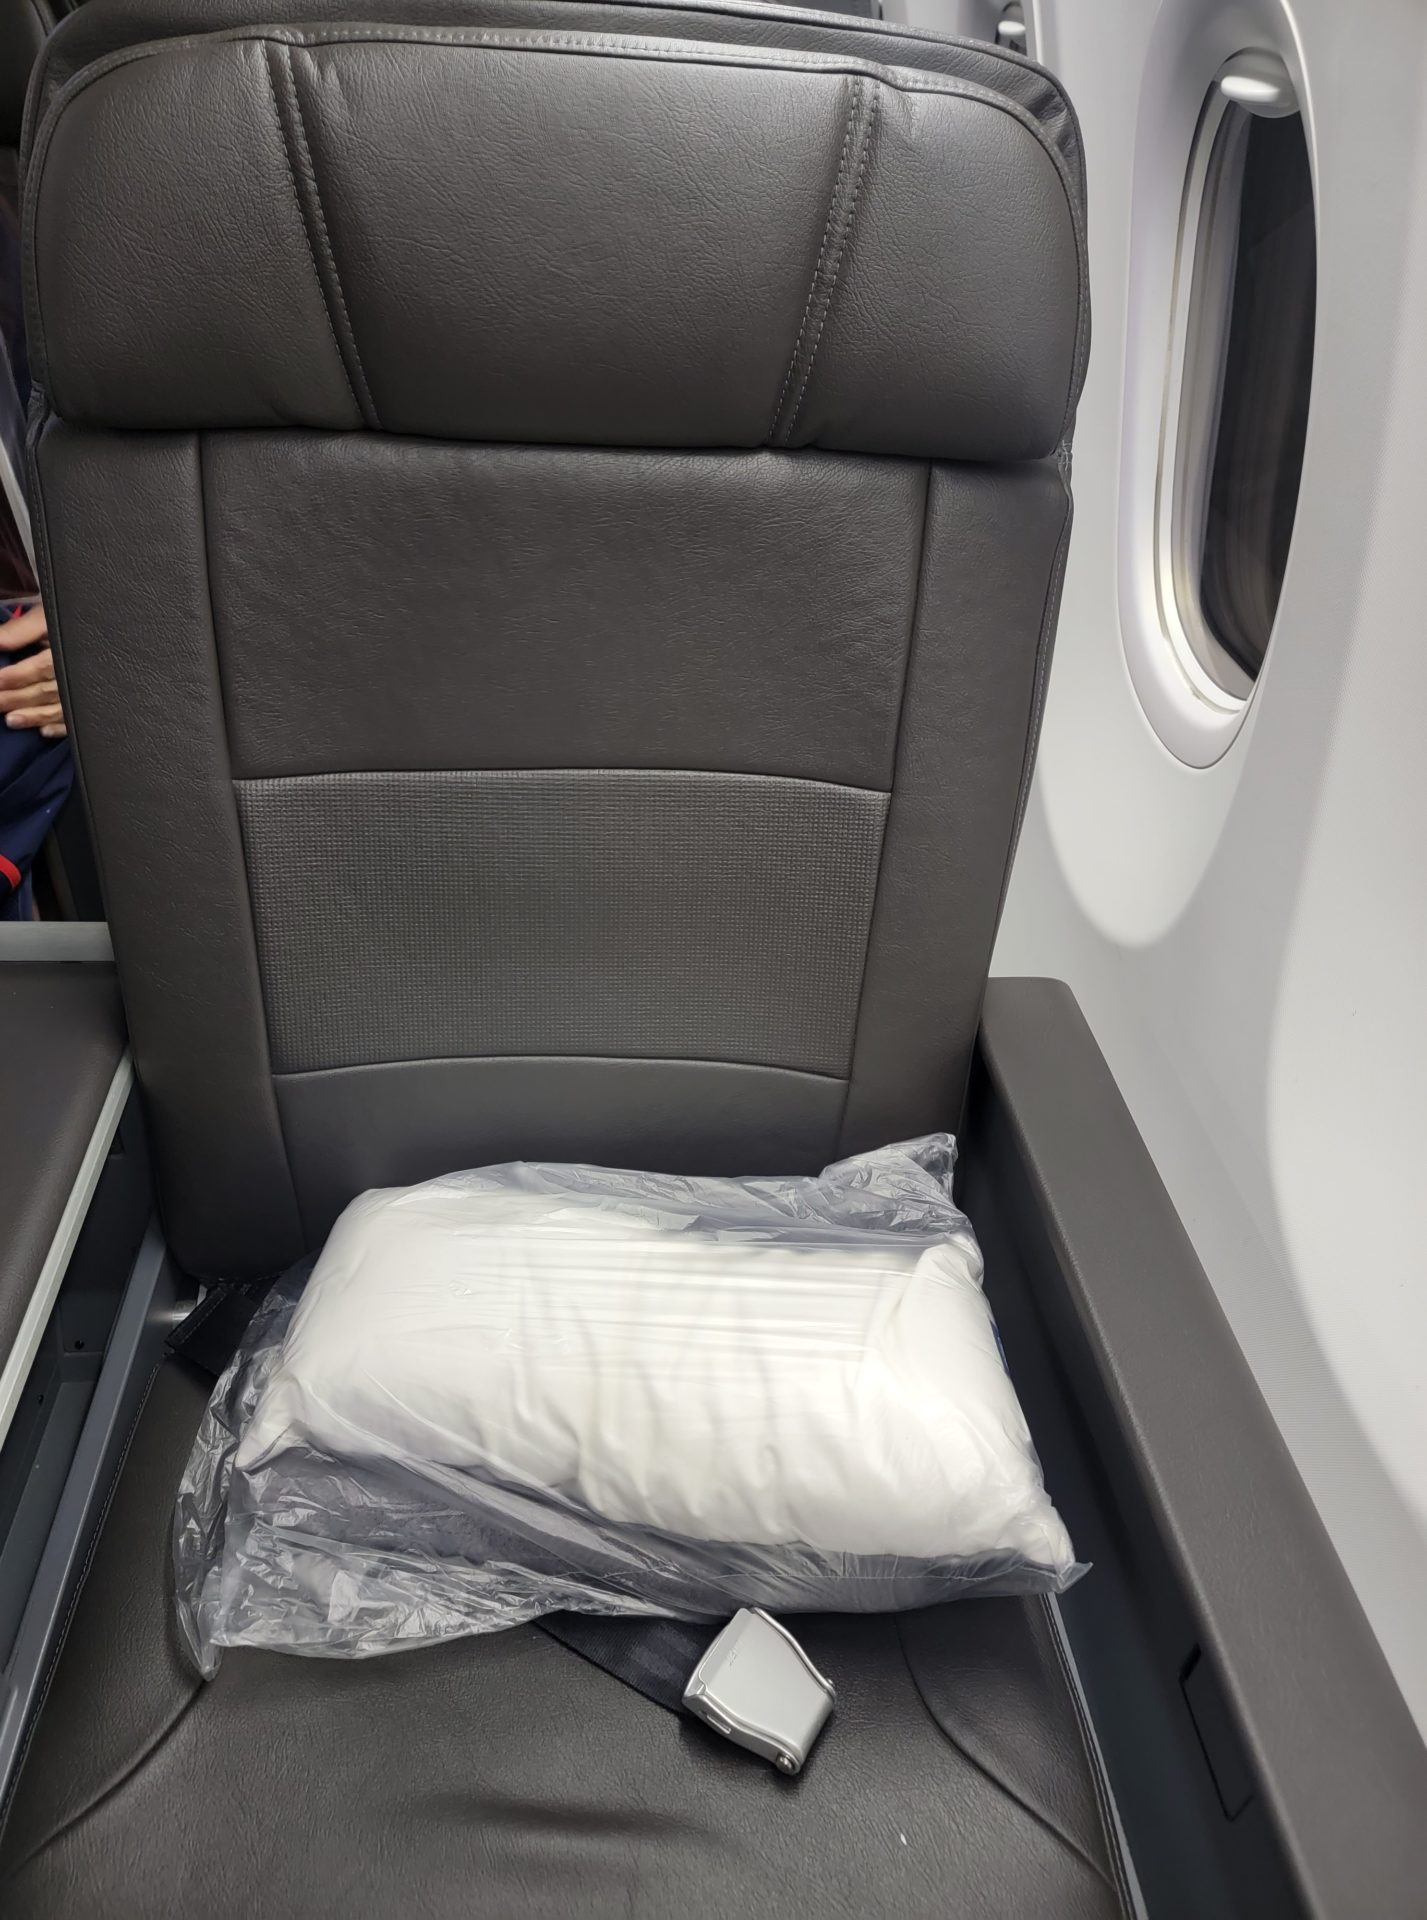 a white pillow in a plastic bag on a seat of an airplane